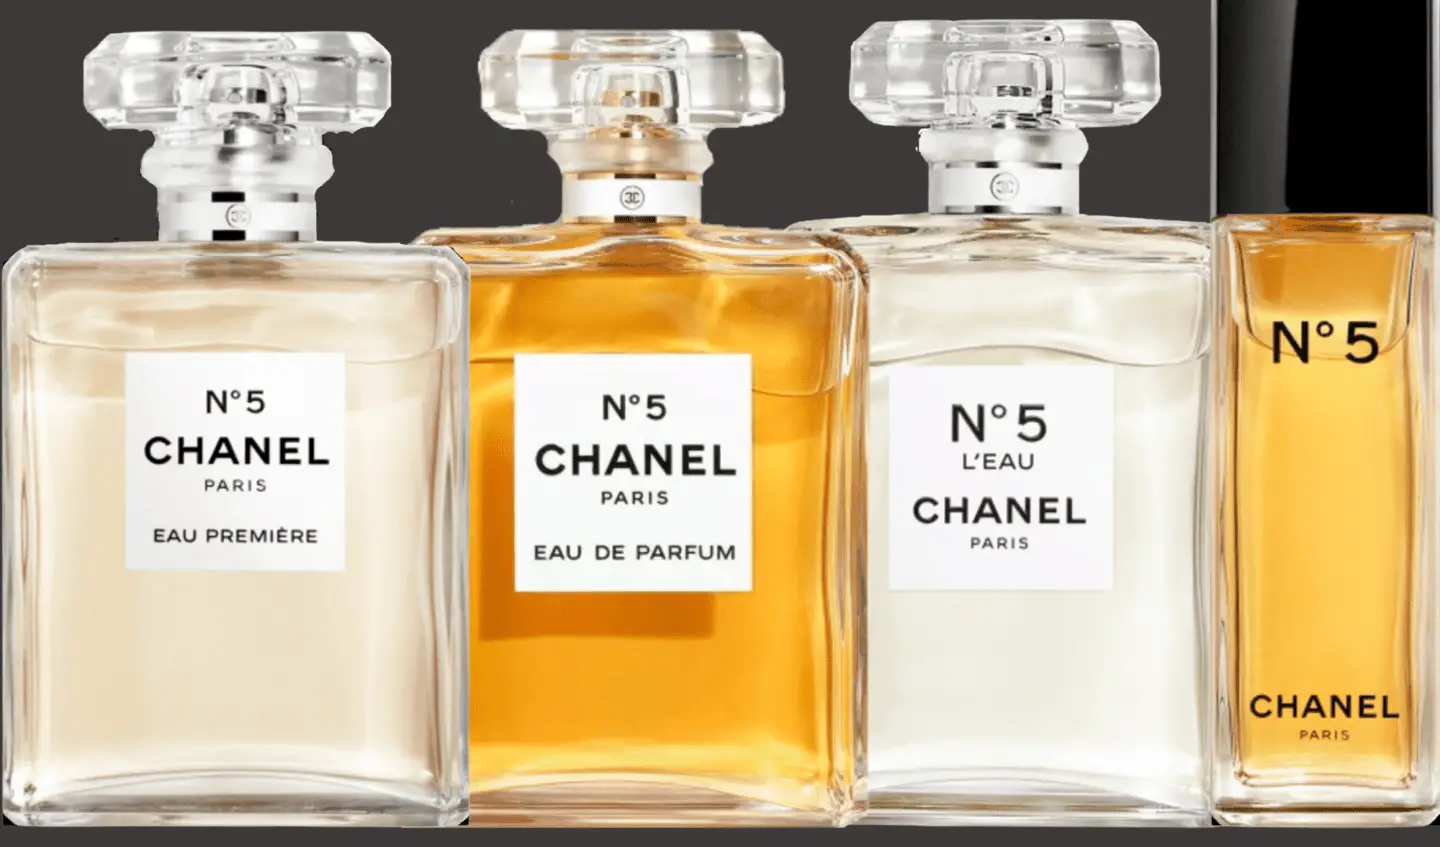 The Ultimate Guide To The Chanel No 5 Perfume Range
The Top Ten Best Selling Perfumes In The World